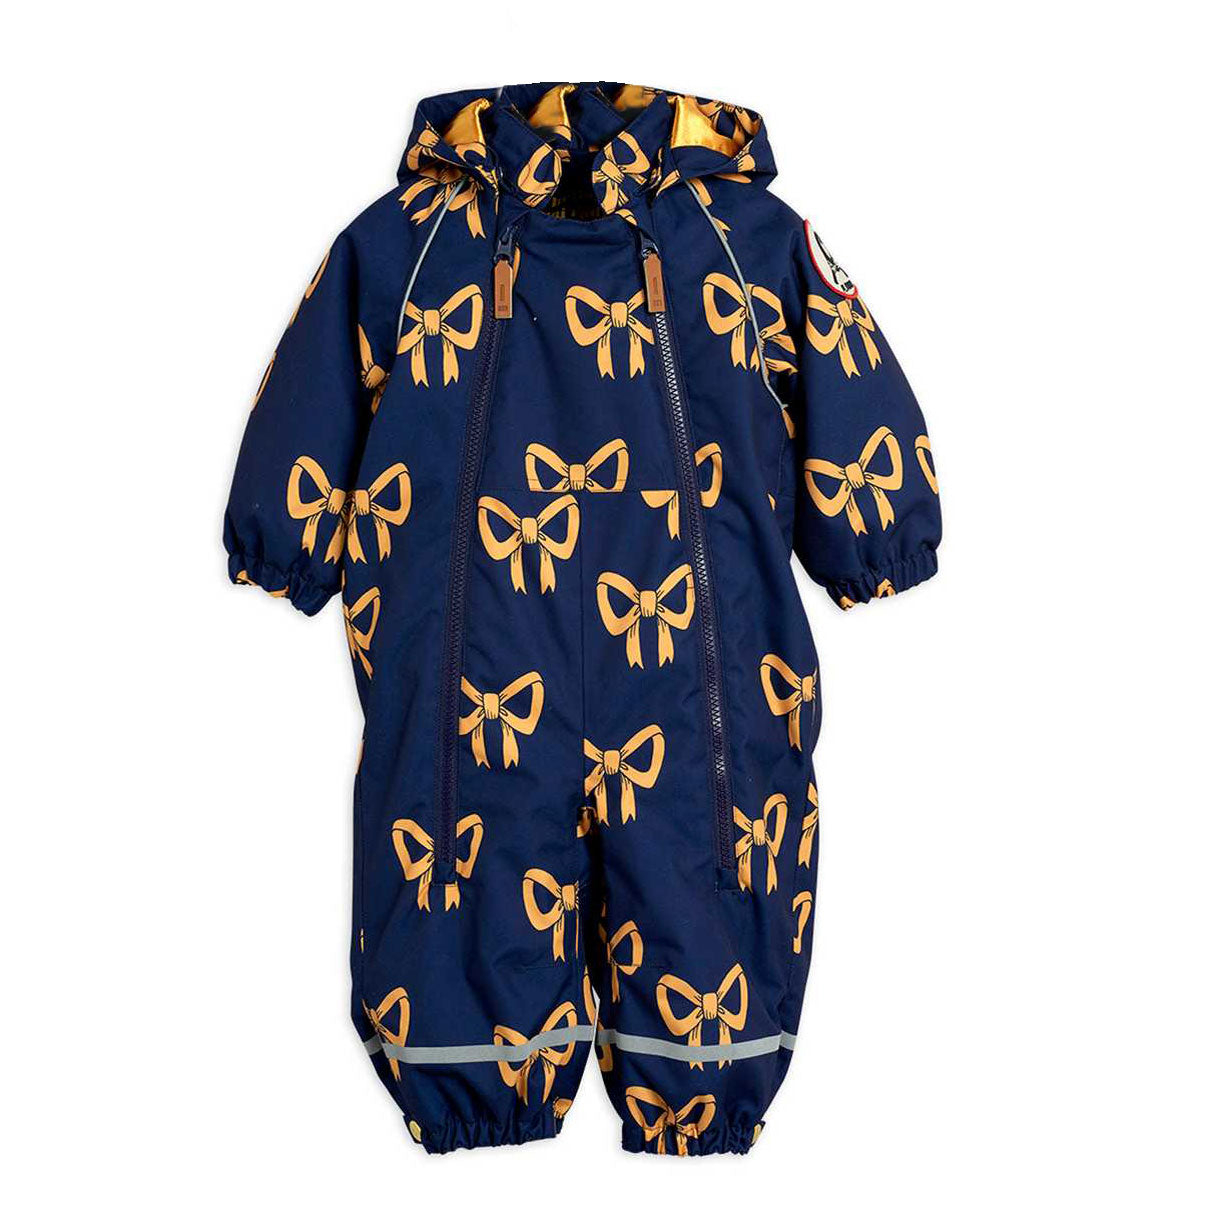 Mini Rodini Baby Outerwear with bows print at Bonjour Baby Baskets